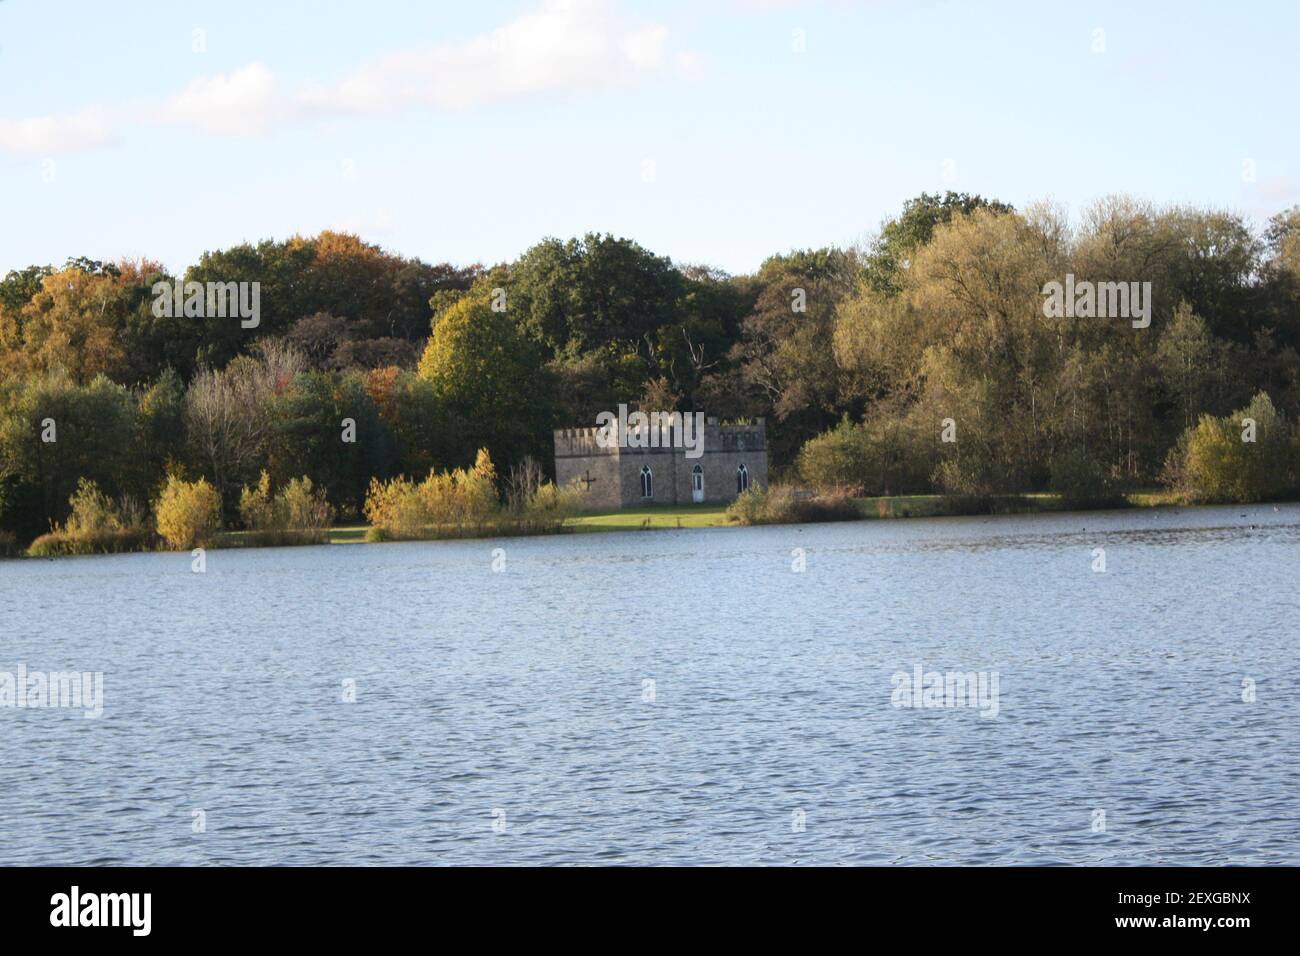 The Lake at Kiplin Hall in Yorkshire near Richmond showing the view across the lake and the Halls Summer house Stock Photo